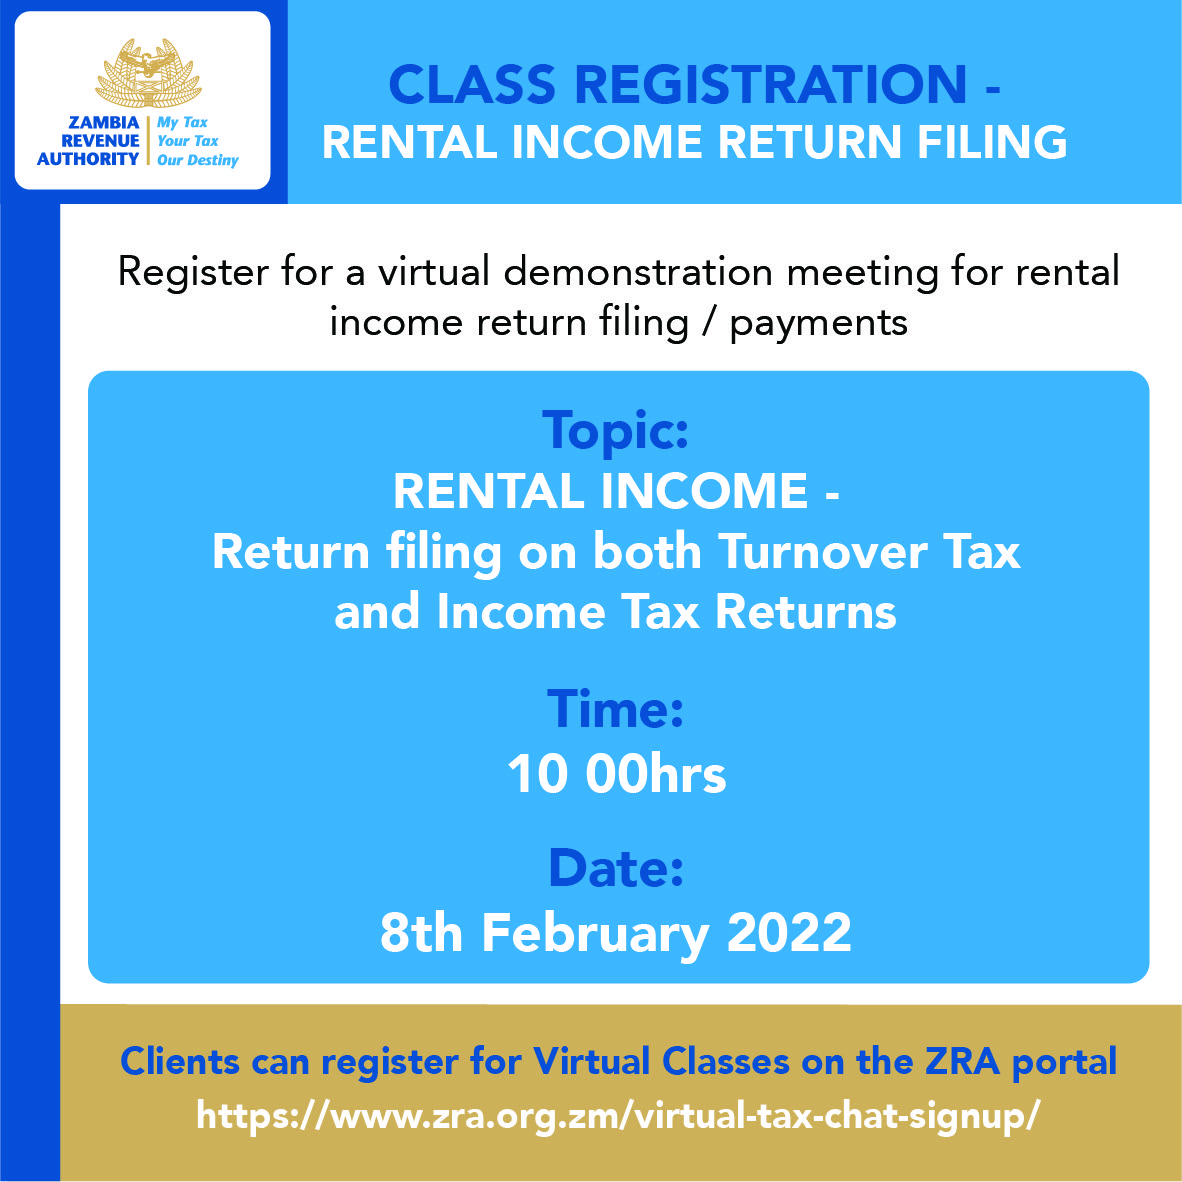 Register for a virtual demonstration meeting for rental income return filing/payments zra.org.zm/virtual-tax-ch…